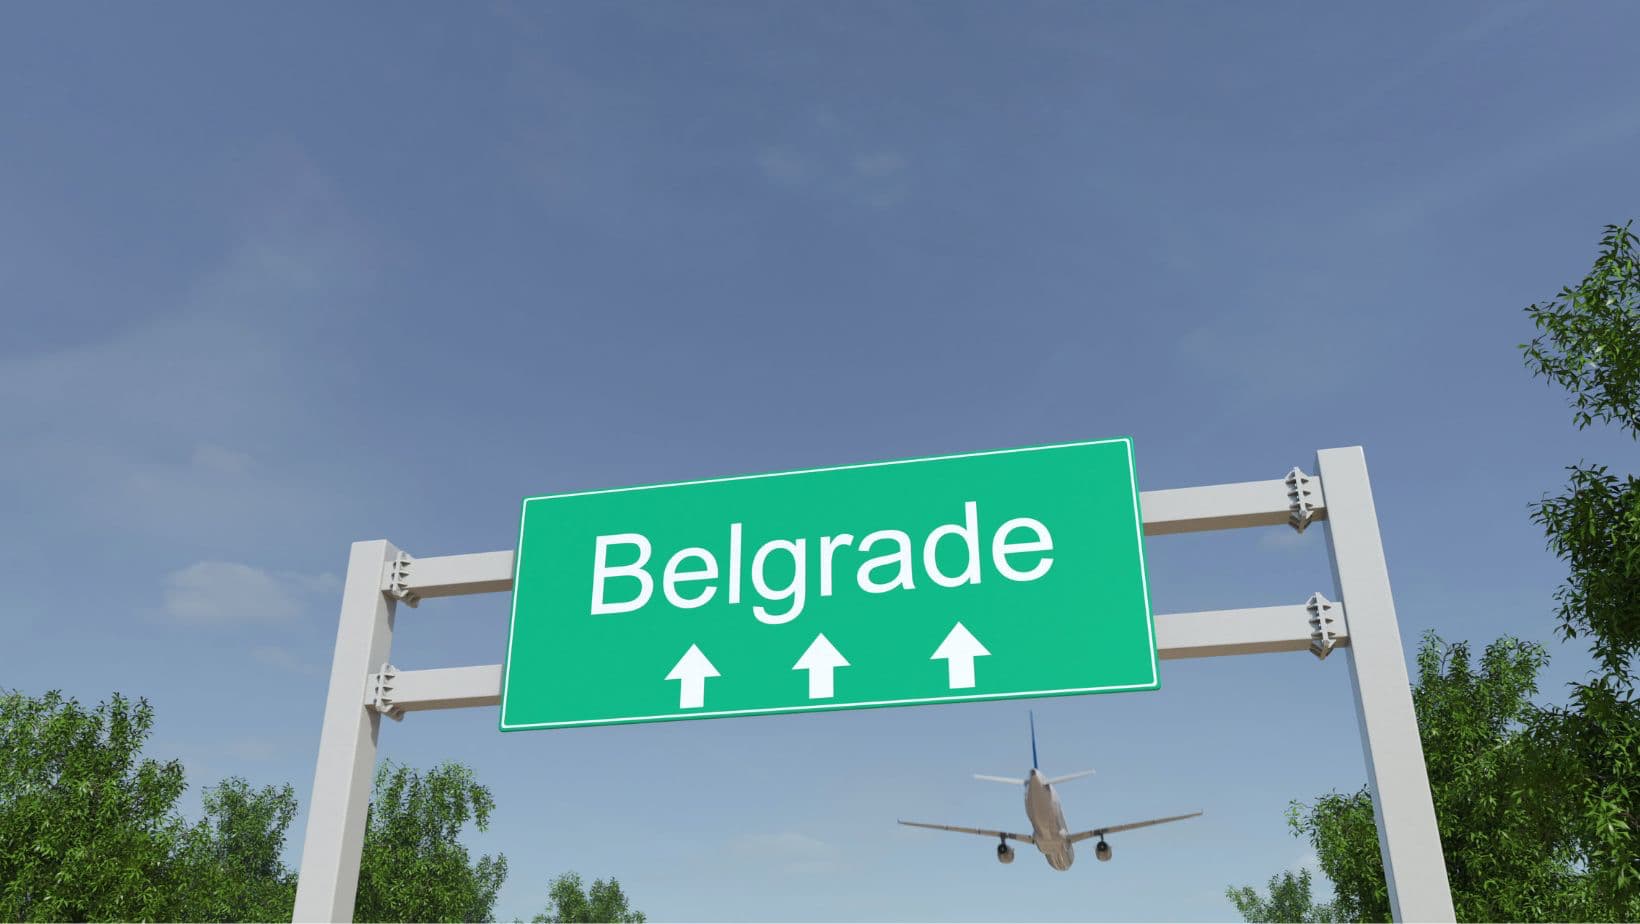 An airplane flying over the sign pointing to Belgrade